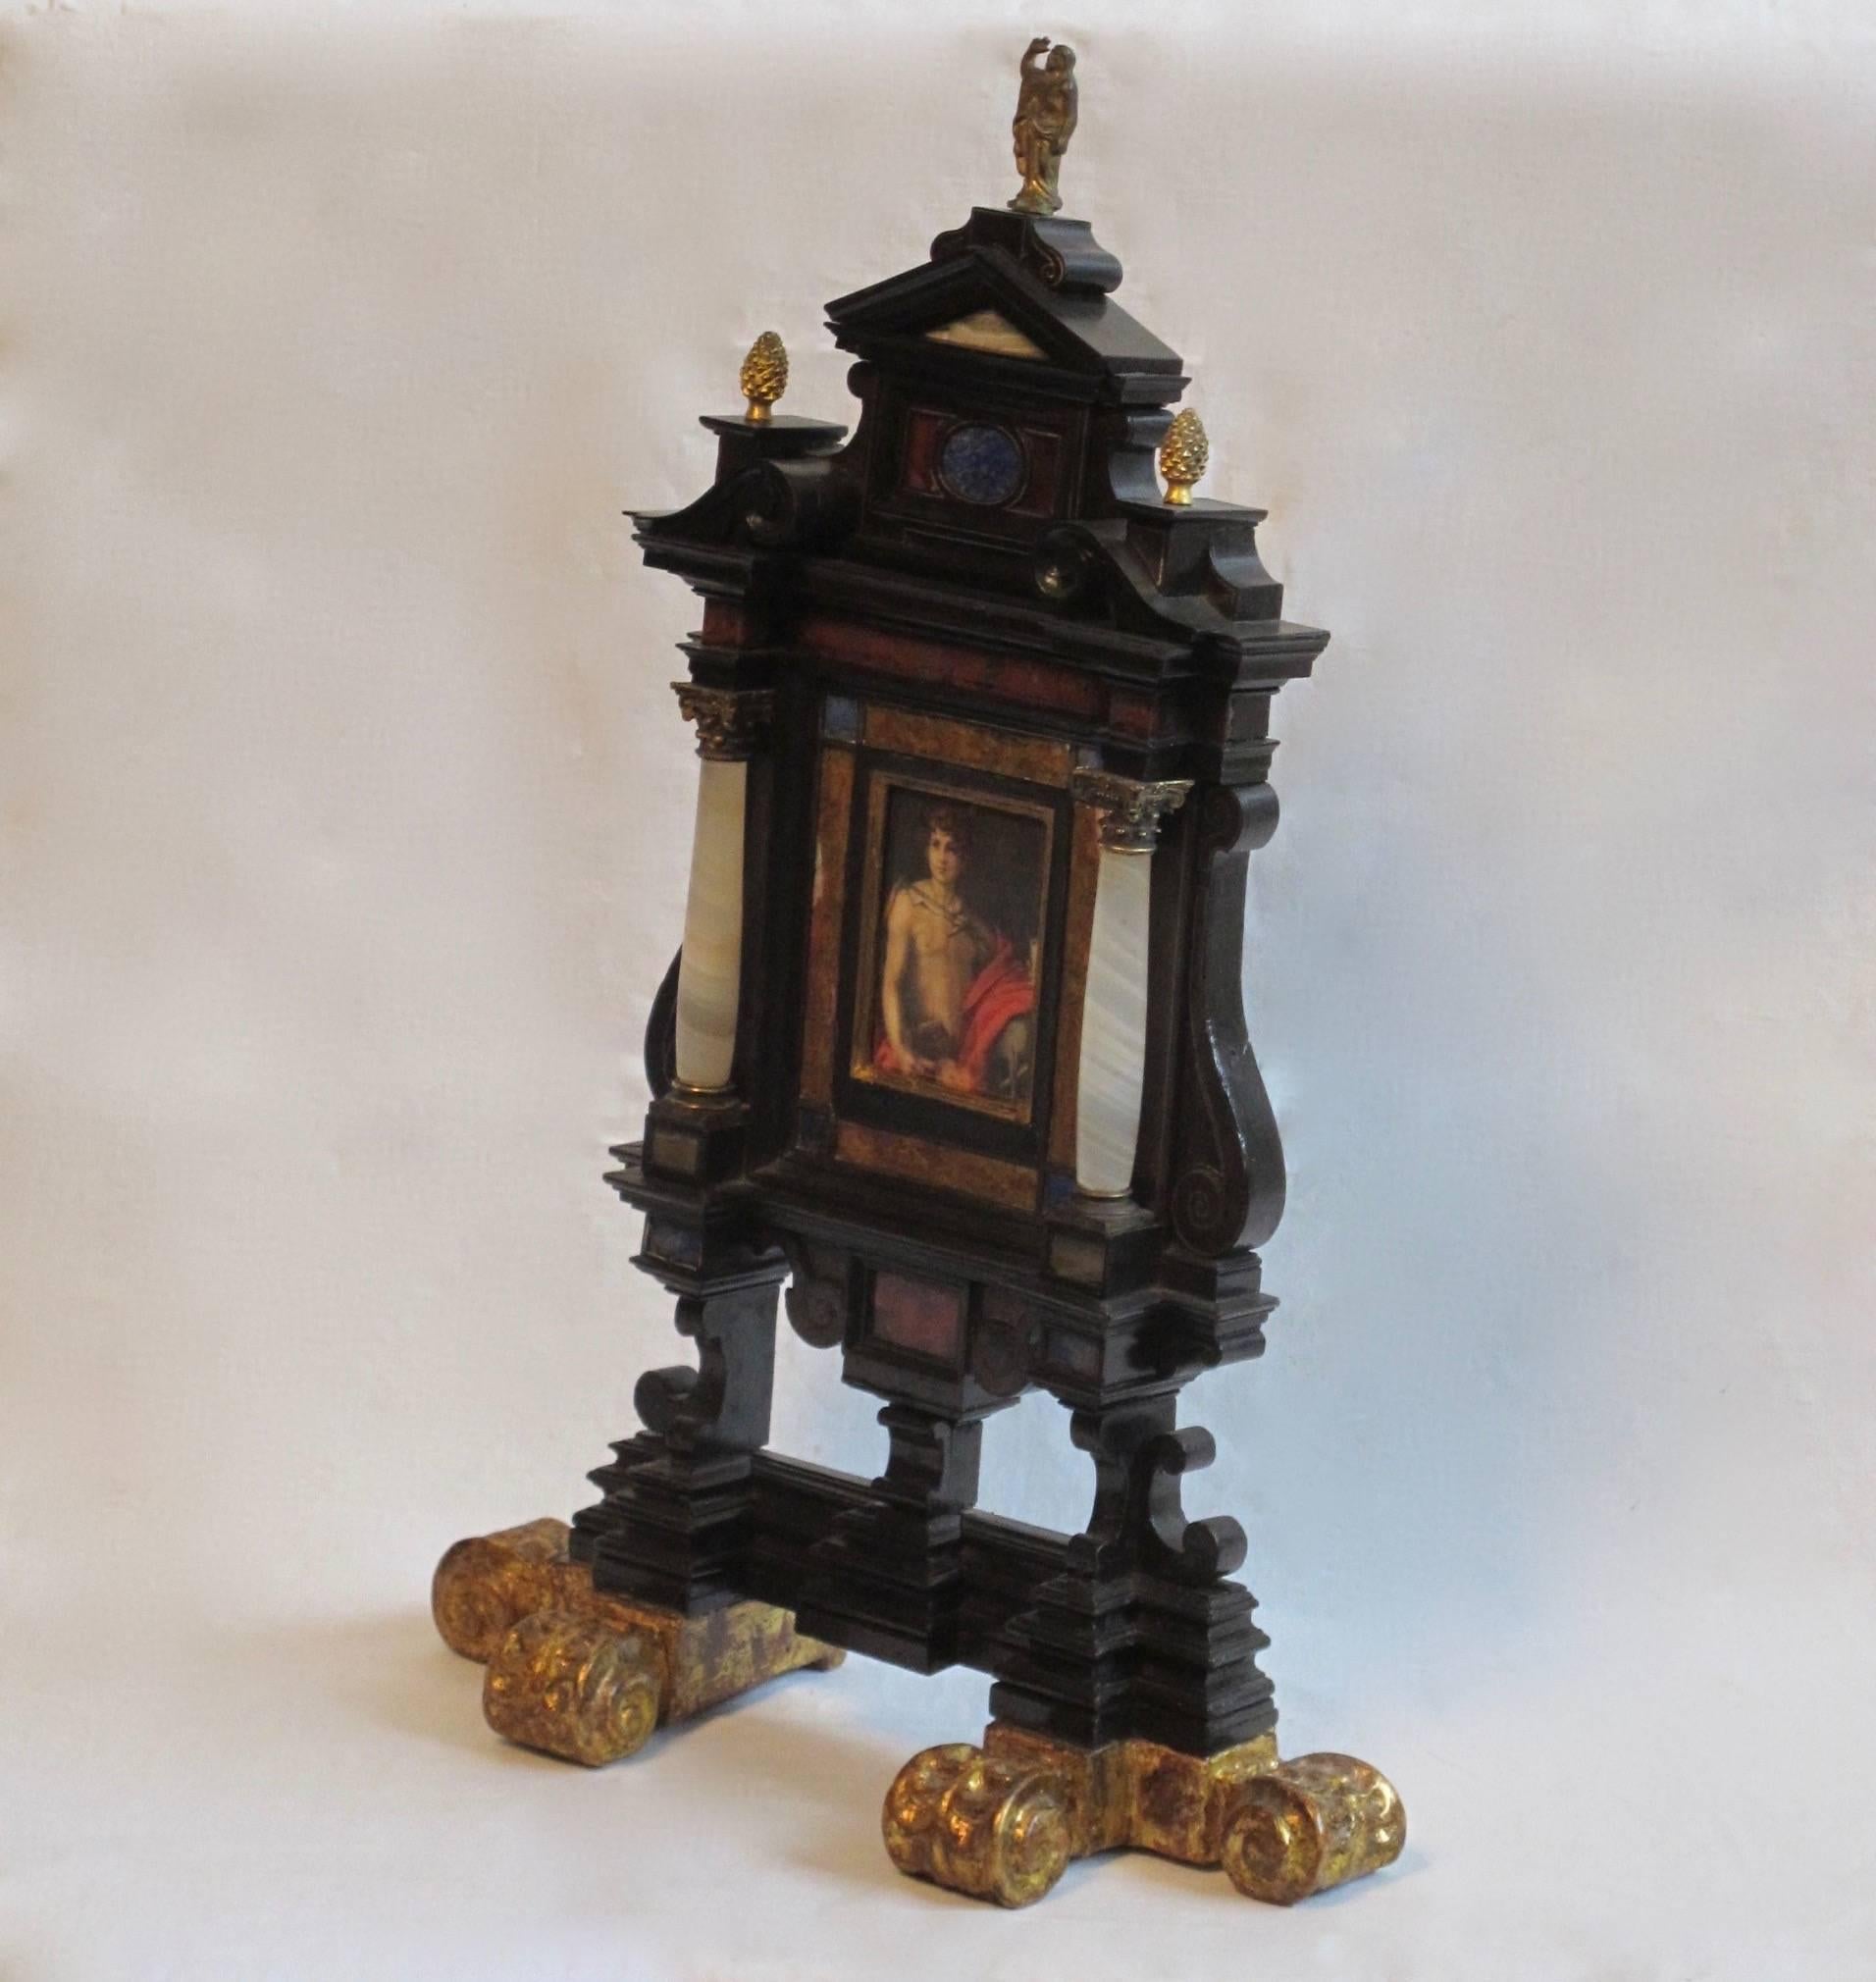 An exquisite Italian Renaissance/Baroque style tabletop / standing ebonized frame with inlaid lapis, carnelian, agate and marble. Having bronze pineapple finials and figure standing atop an arched pediment, the agate columns flanking an early 19th